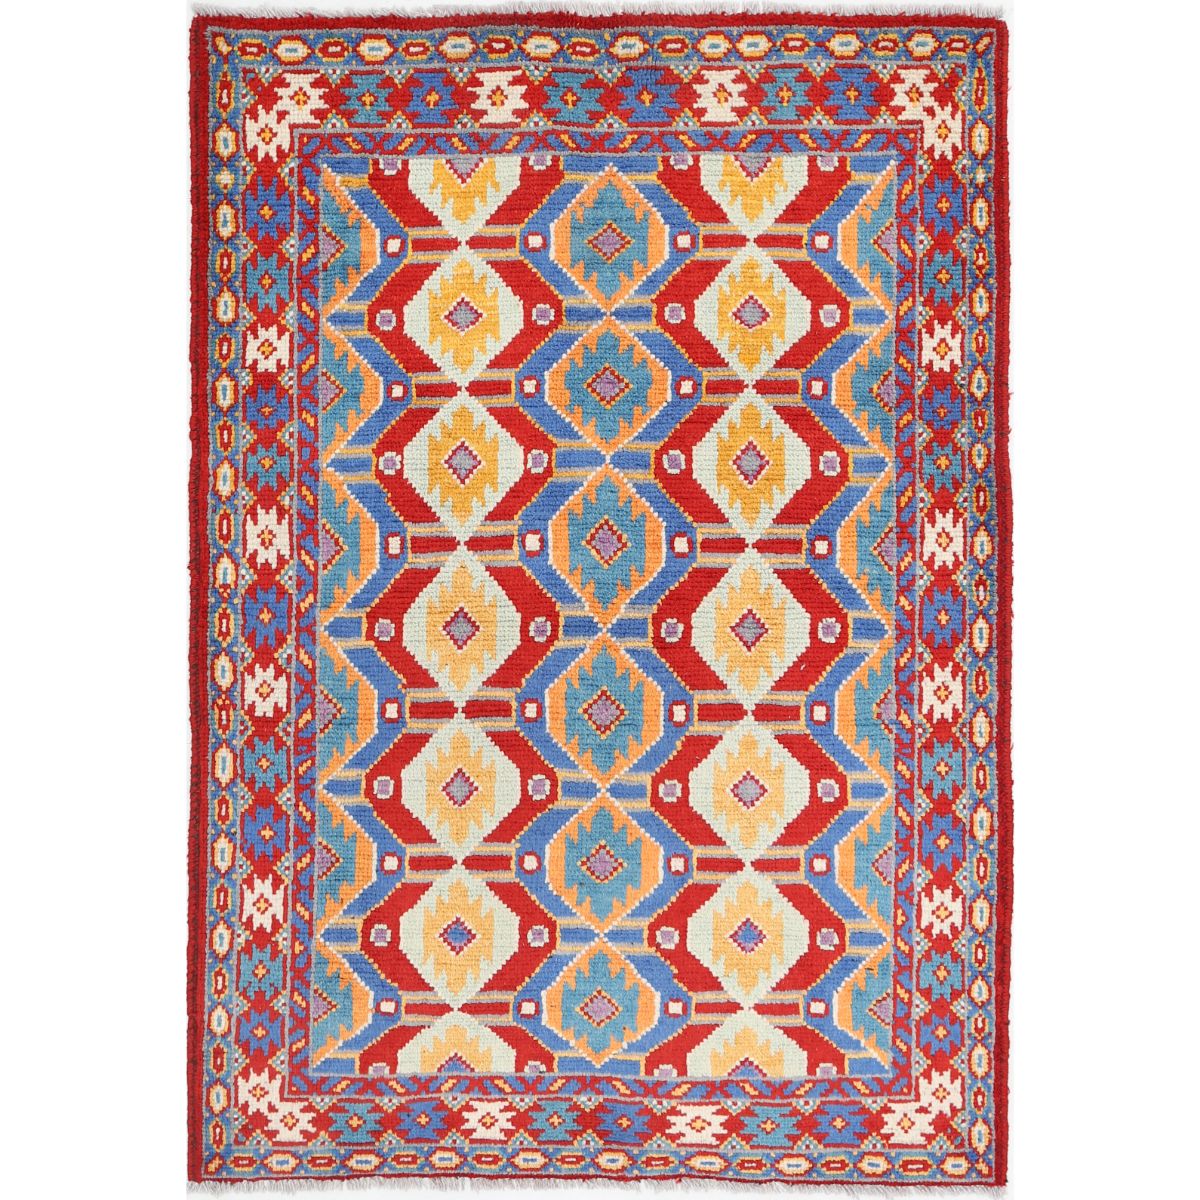 Revival 3' 5" X 4' 11" Wool Hand Knotted Rug